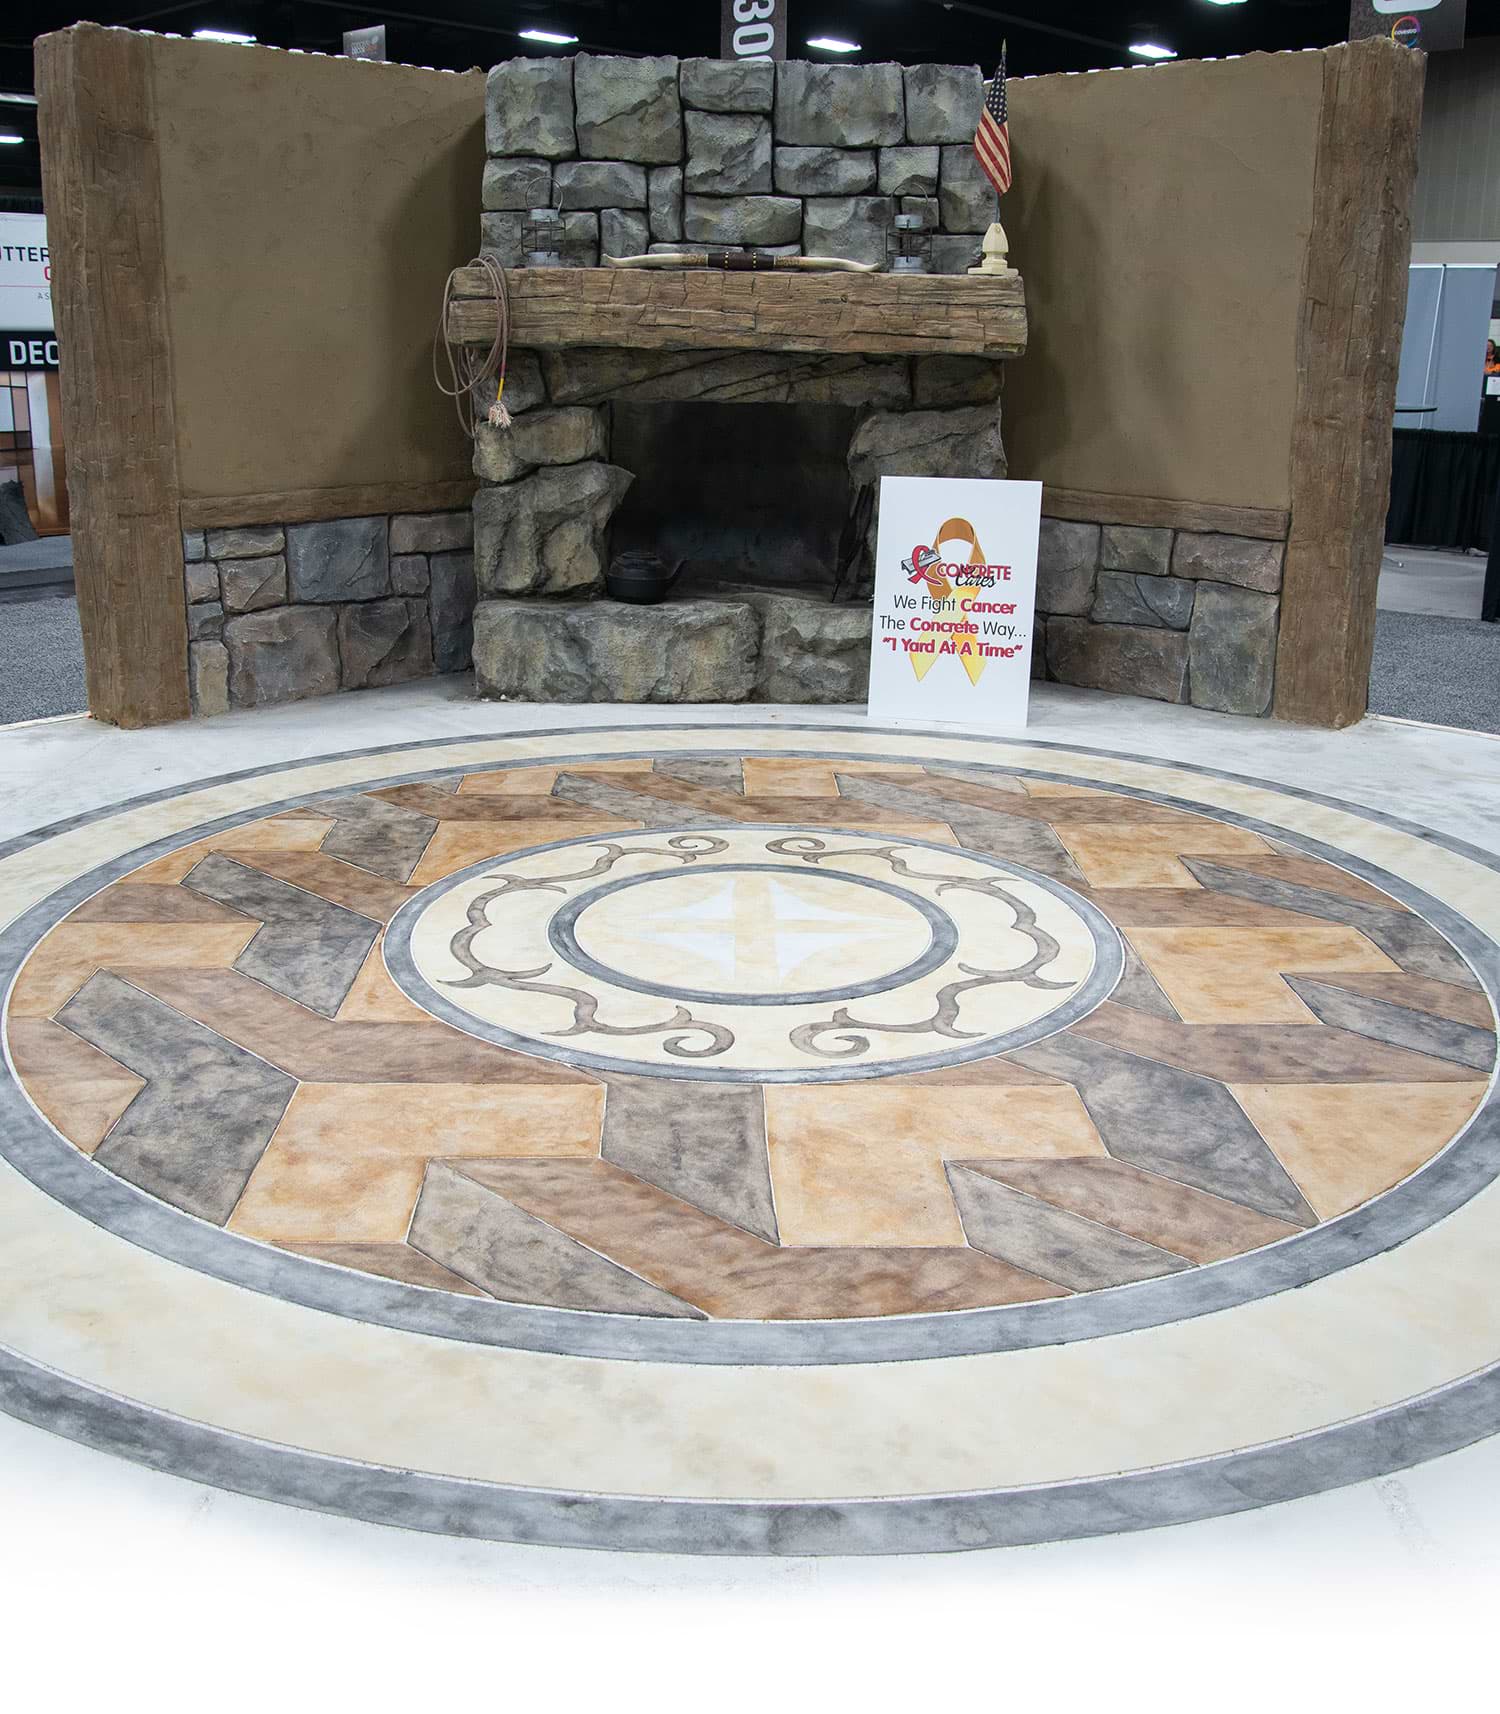 2019 Concrete Decor Show promotes product launches, ongoing demonstrations